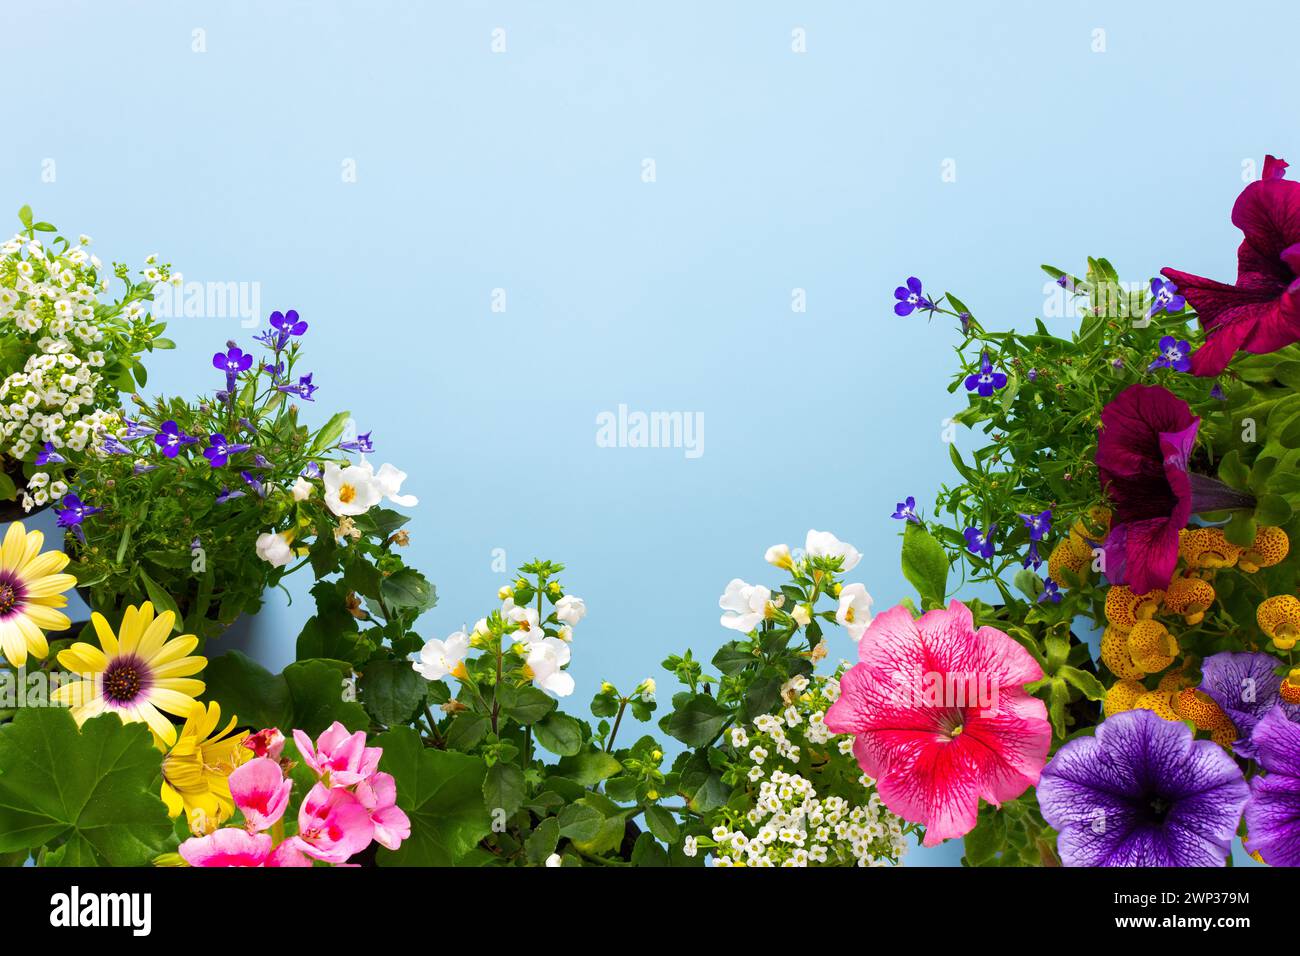 Spring decoration of a home balcony or terrace with flowers, Lobelia and Alyssum, Bacopa and Petunia, Geranium and Osteospermum on a blue background, Stock Photo